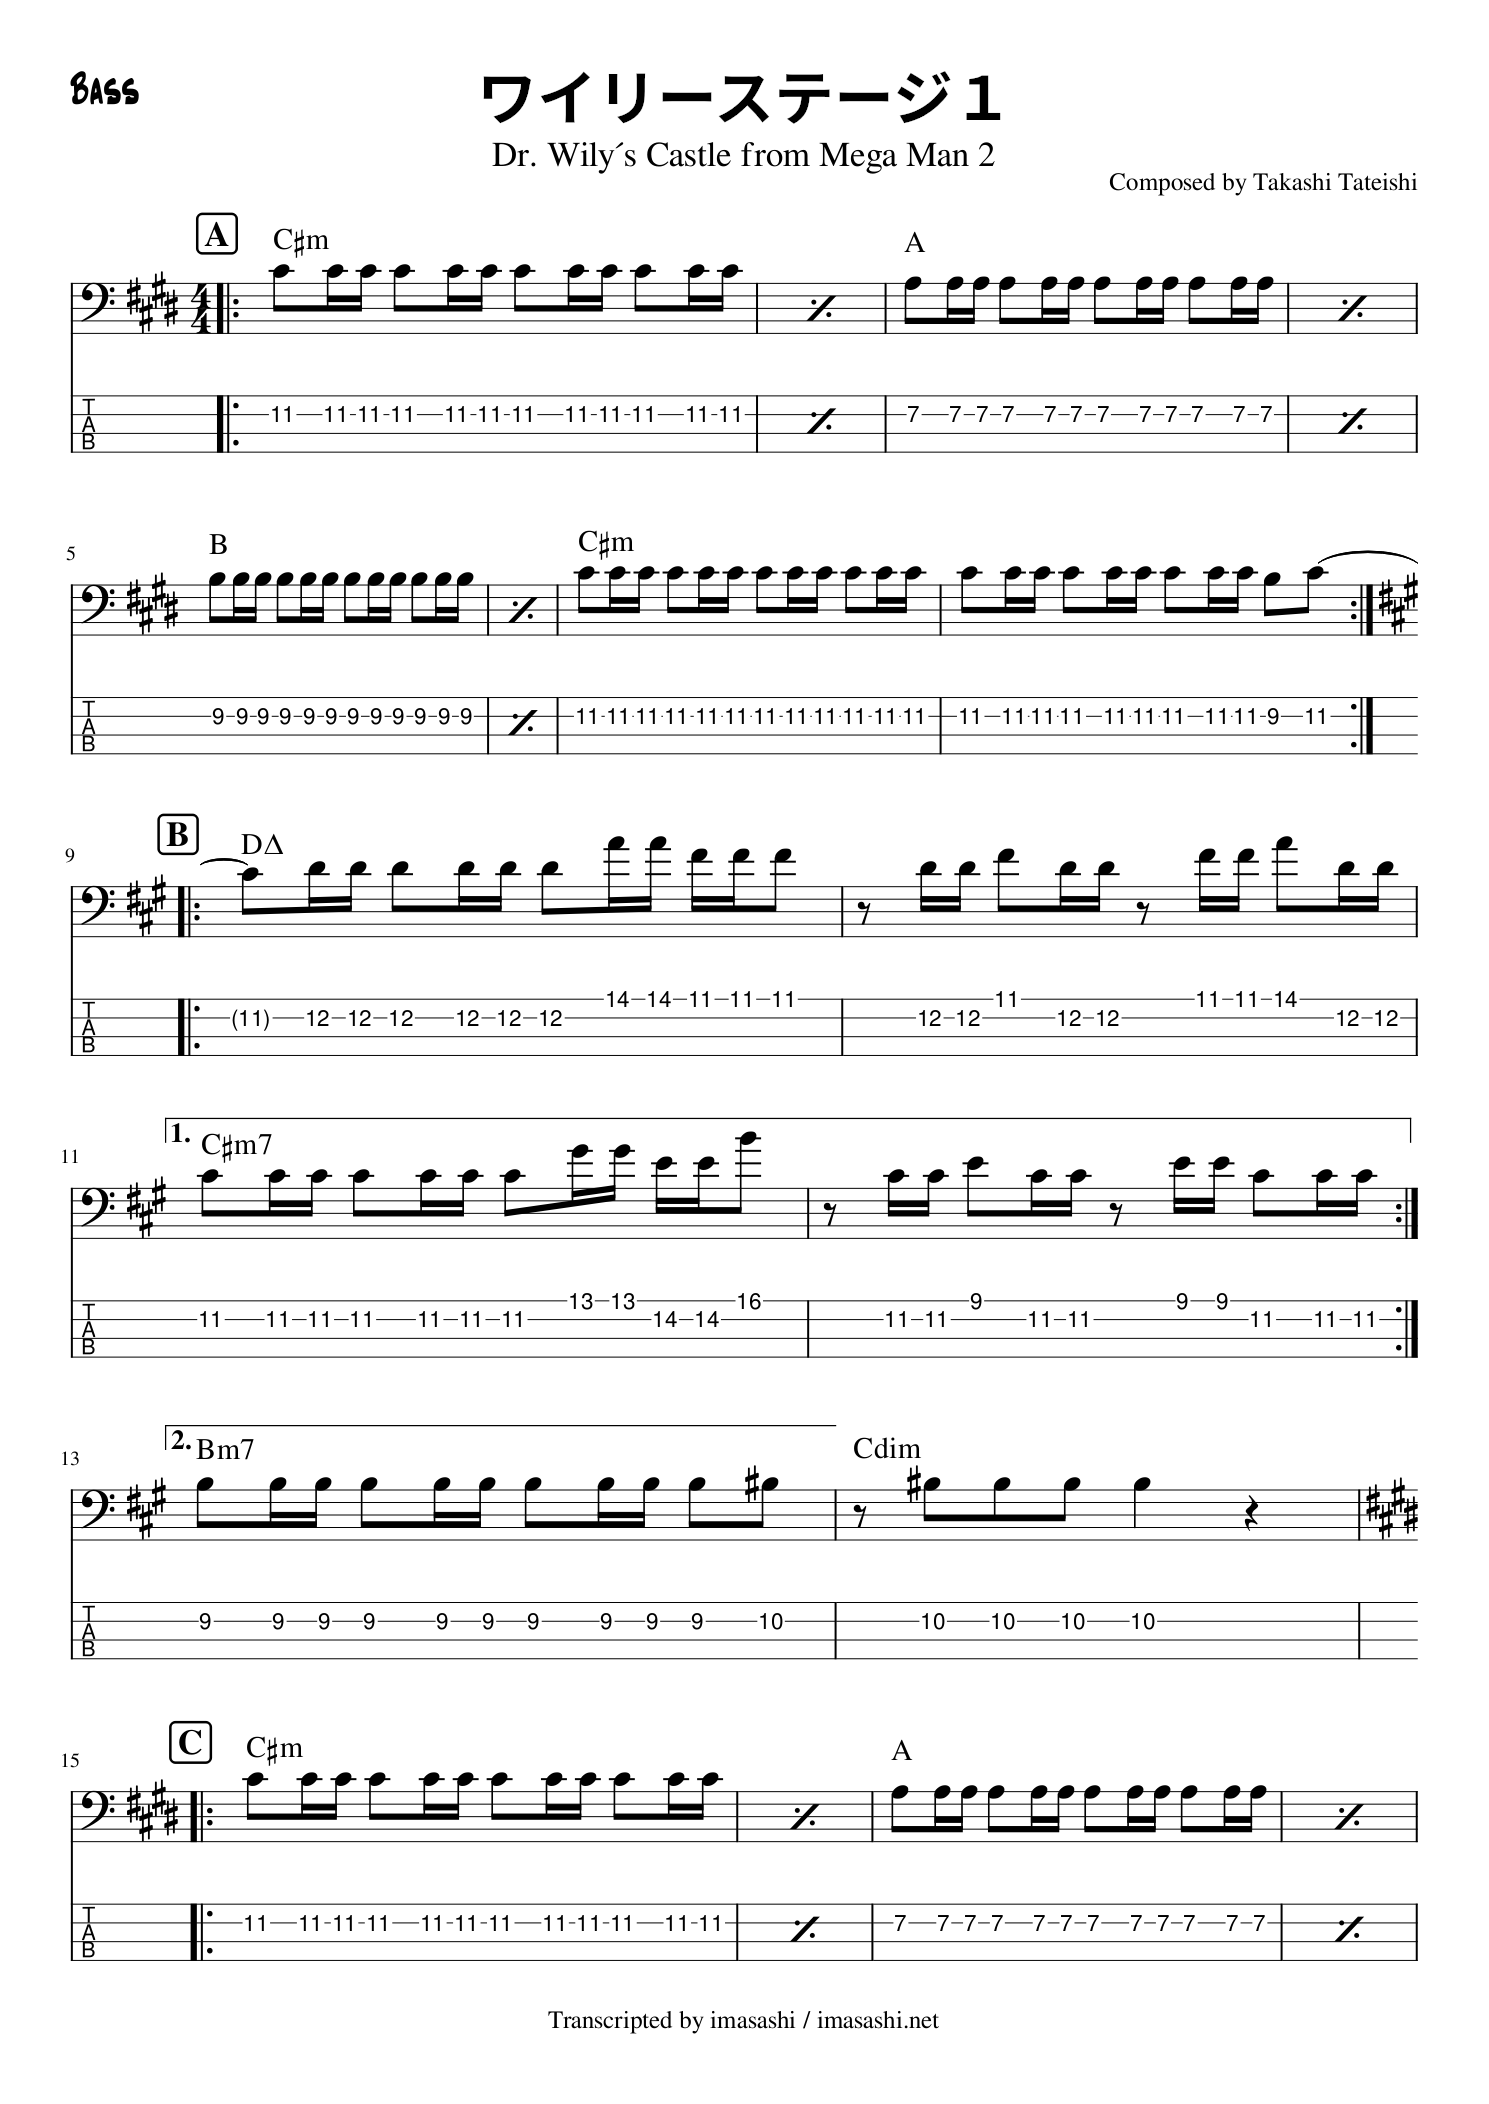 Dr. Wily Stage 1 BGM bass tab 1